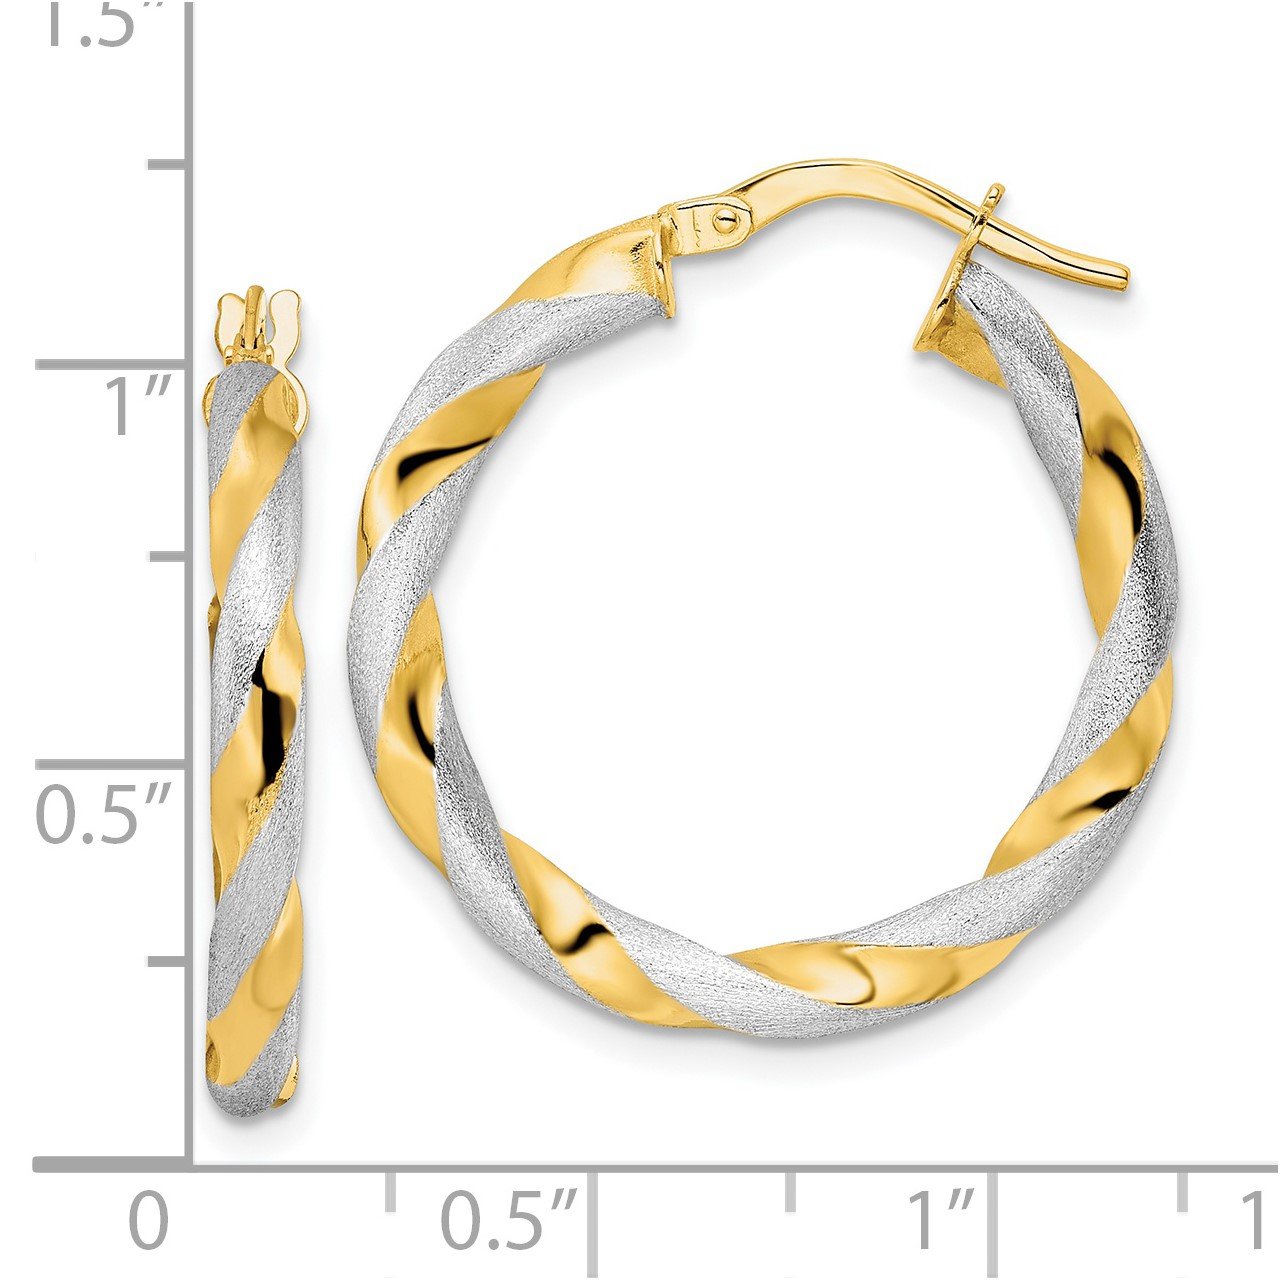 14K and Rhodium Brushed Polished Twisted Hoop Earrings-1